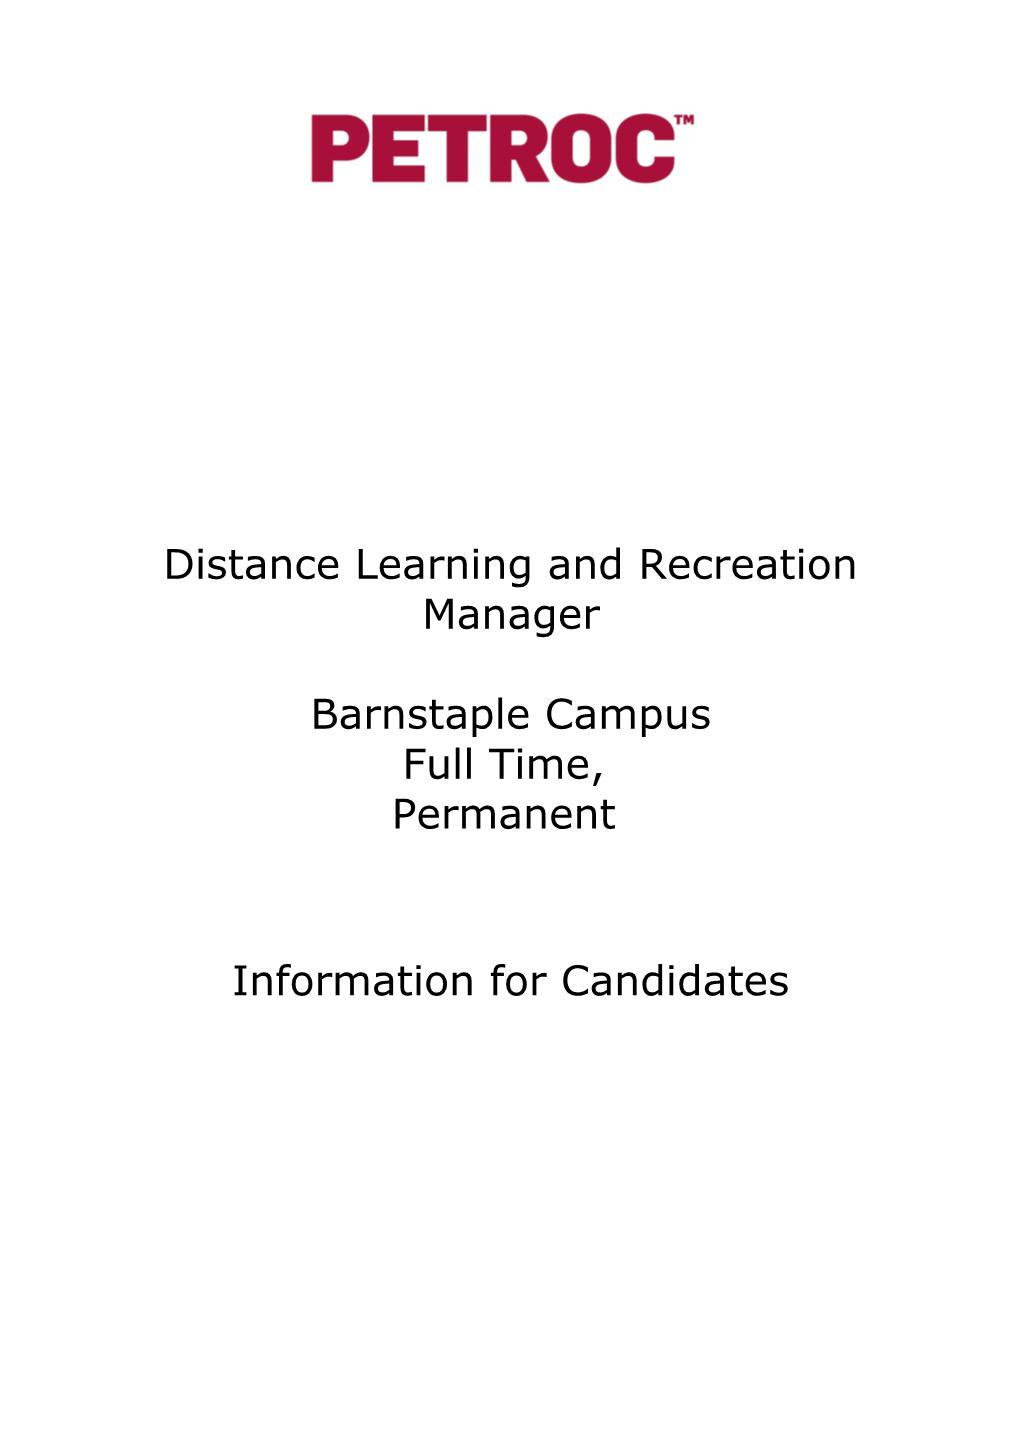 Distance Learning and Recreation Manager